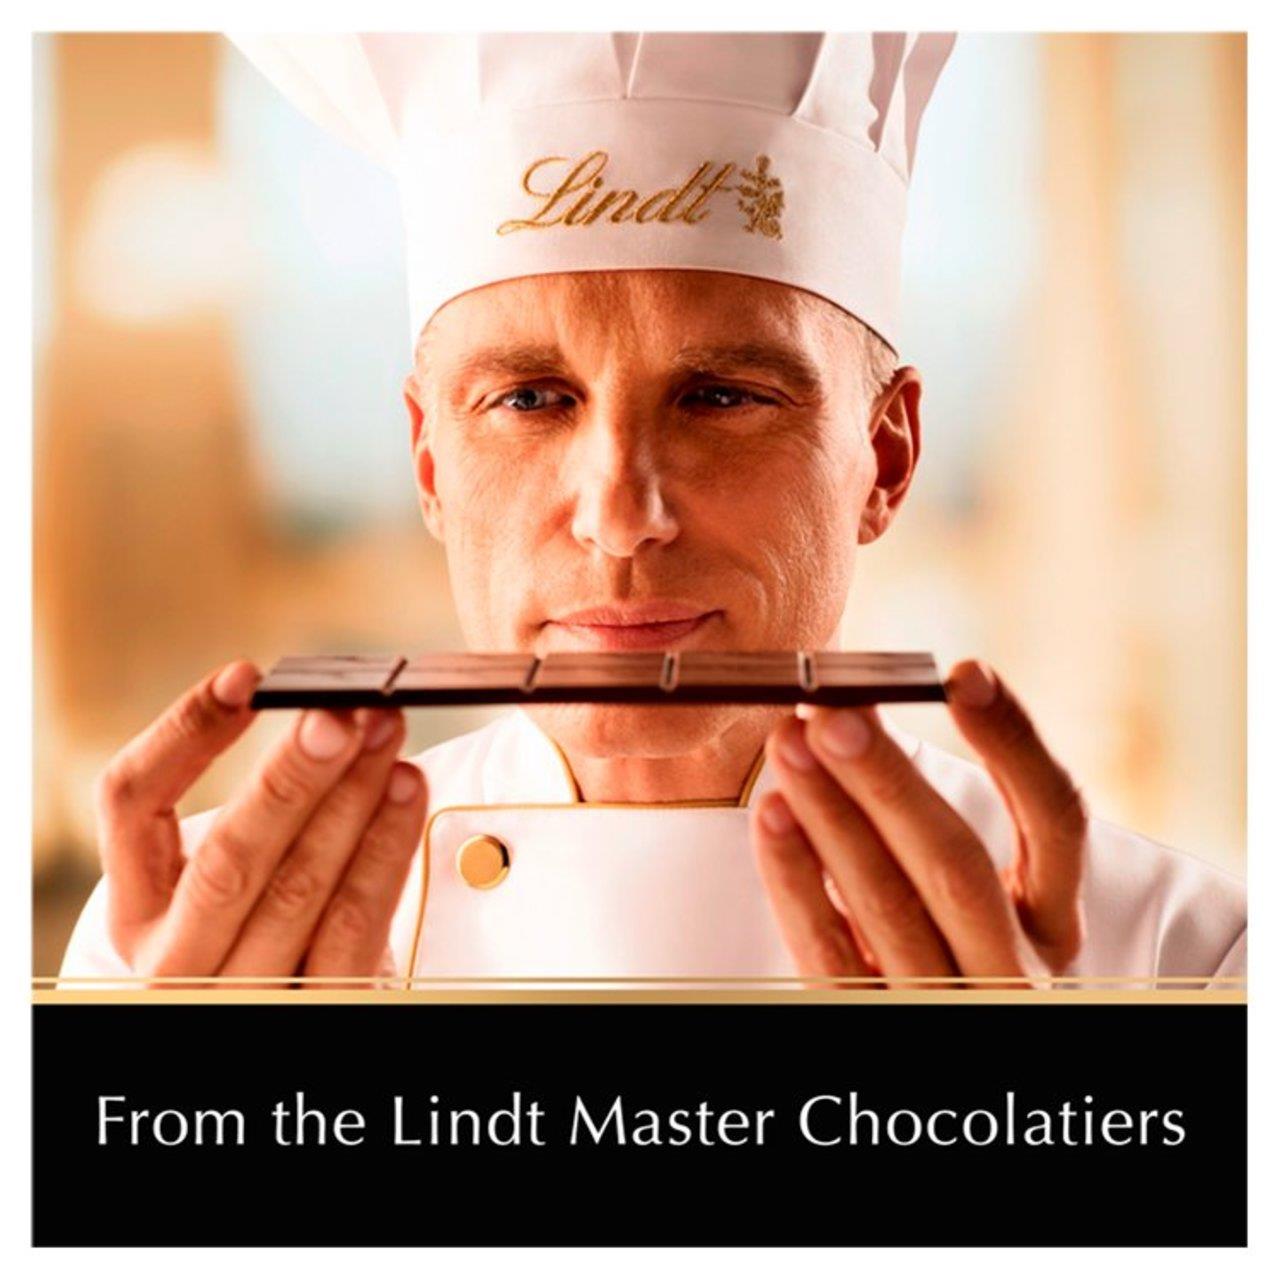 Lindt Excellence 70% Cocoa Chocolate 100g